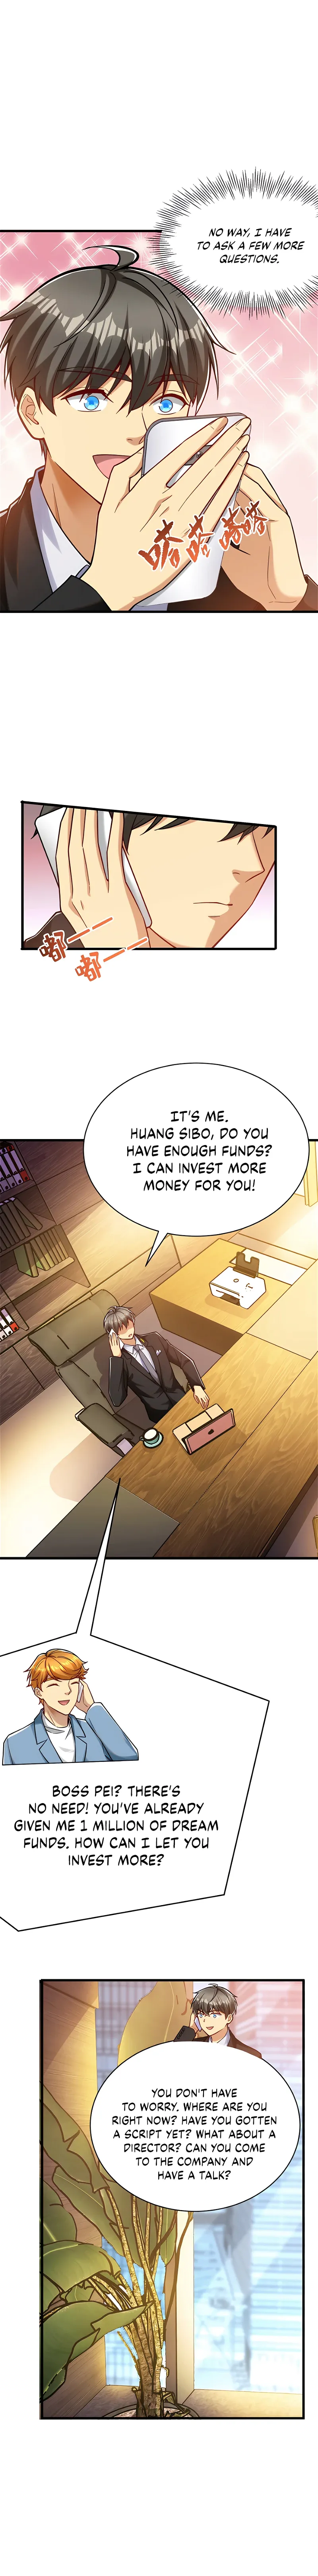 Losing Money To Be A Tycoon Chapter 32 page 9